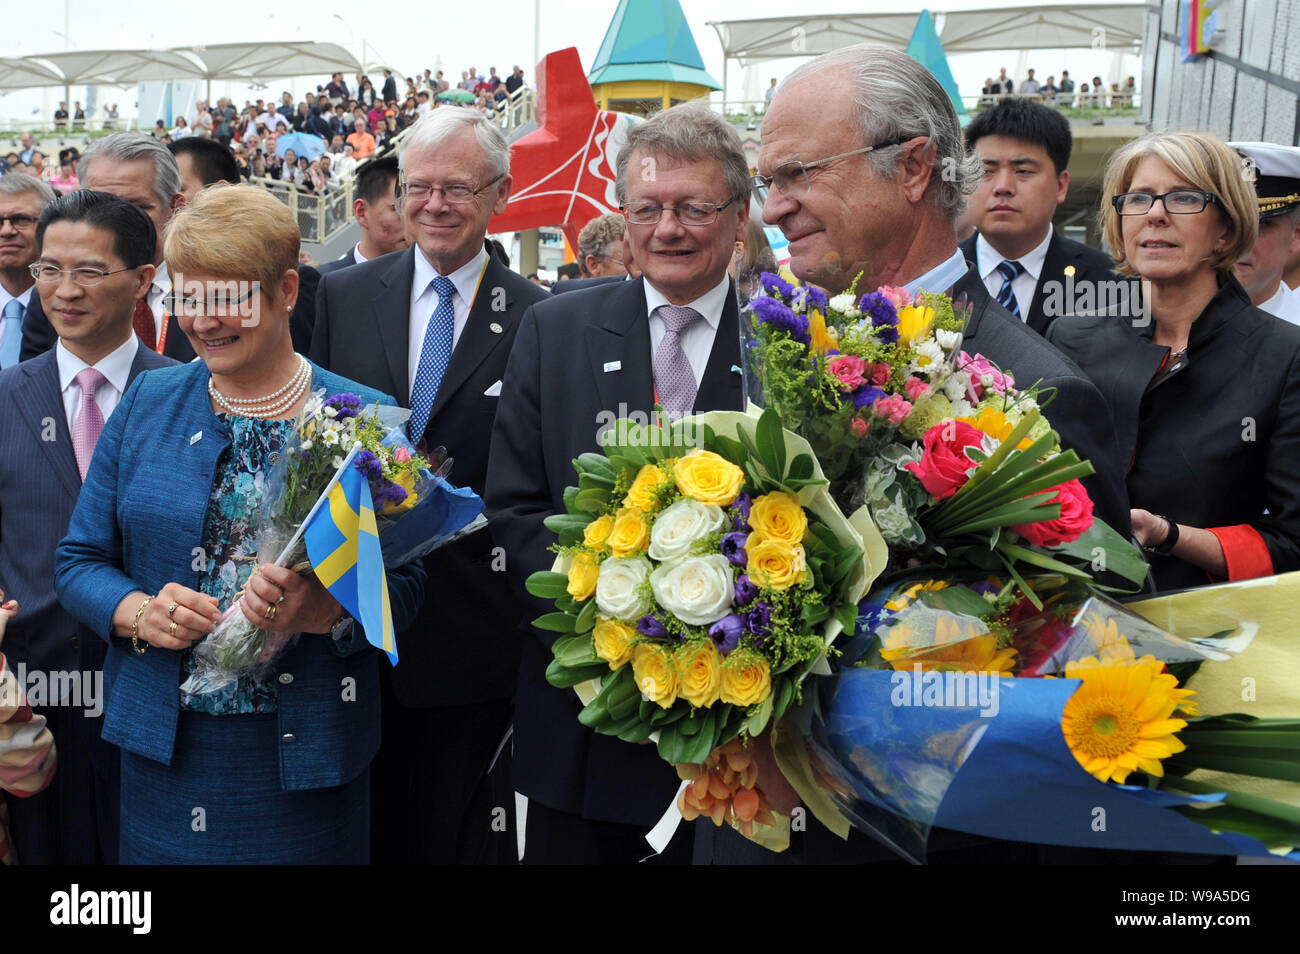 Swedish King Carl XVI Gustaf (F, R), Swedish Deputy Prime Minister Maud Olofsson (F, L) and followers stand next to the Sweden Pavilion in the Expo si Stock Photo